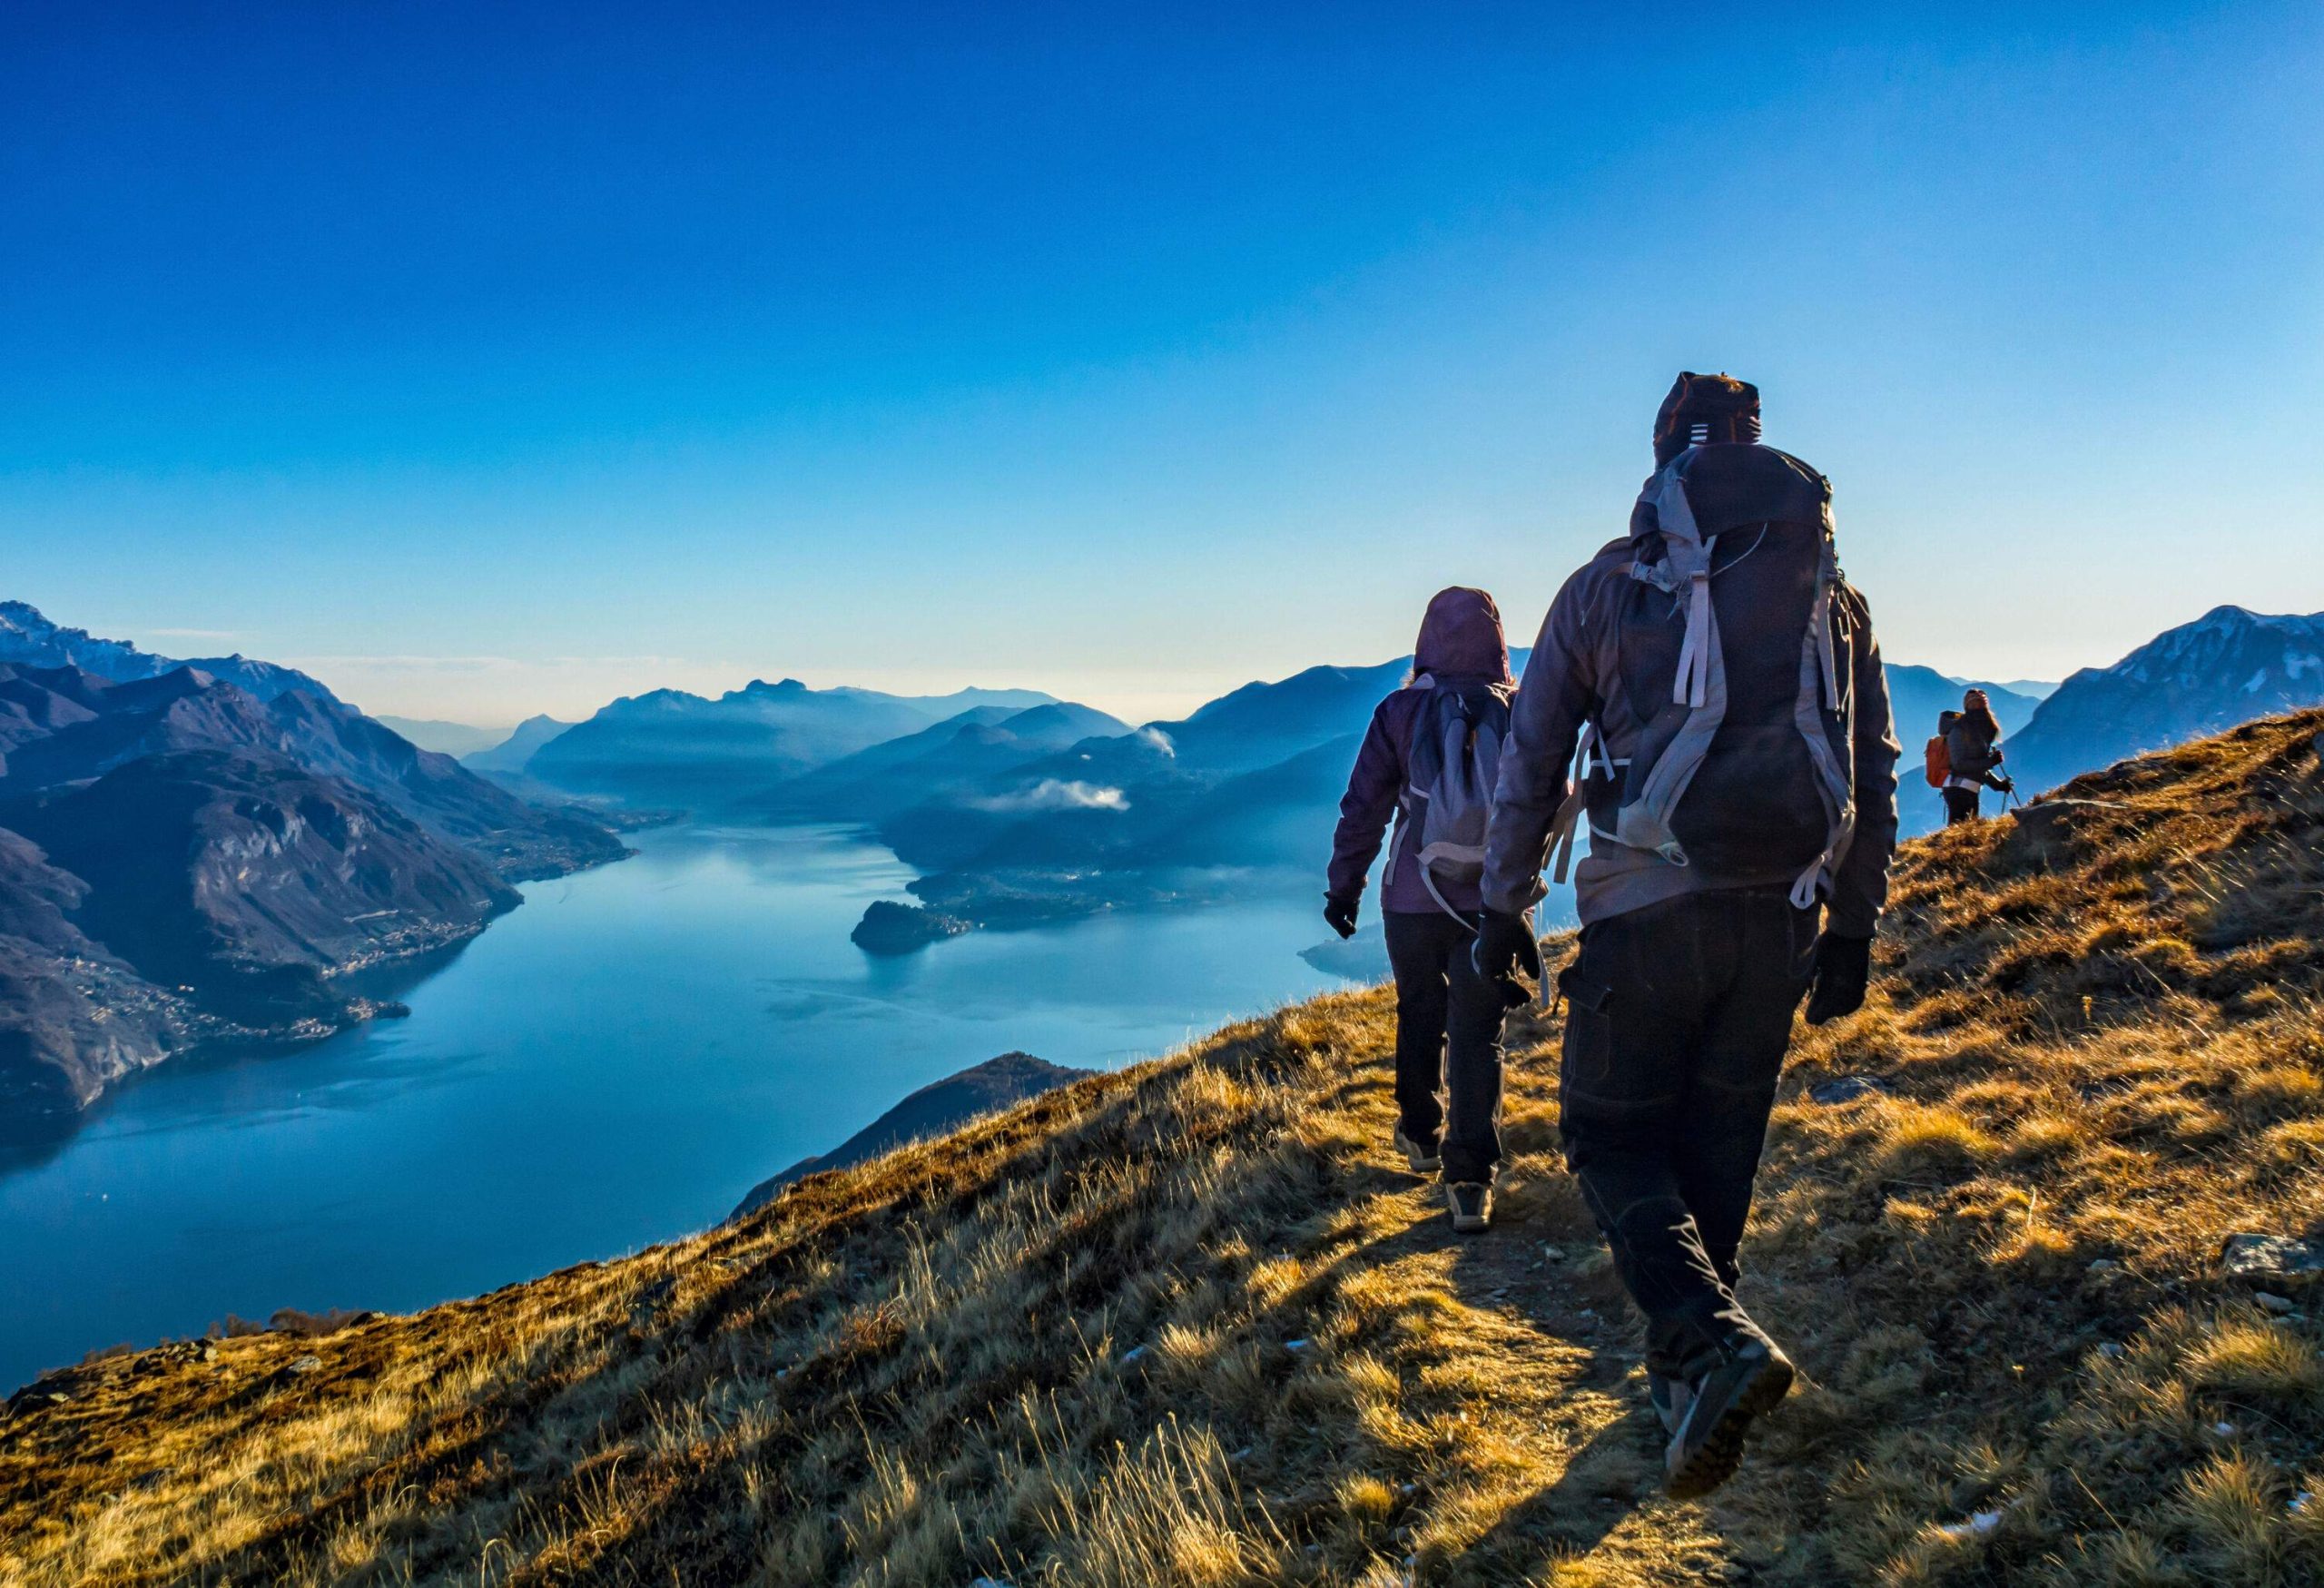 A group of people hiking up a mountain cliff overlooking a lake surrounded by mountains.